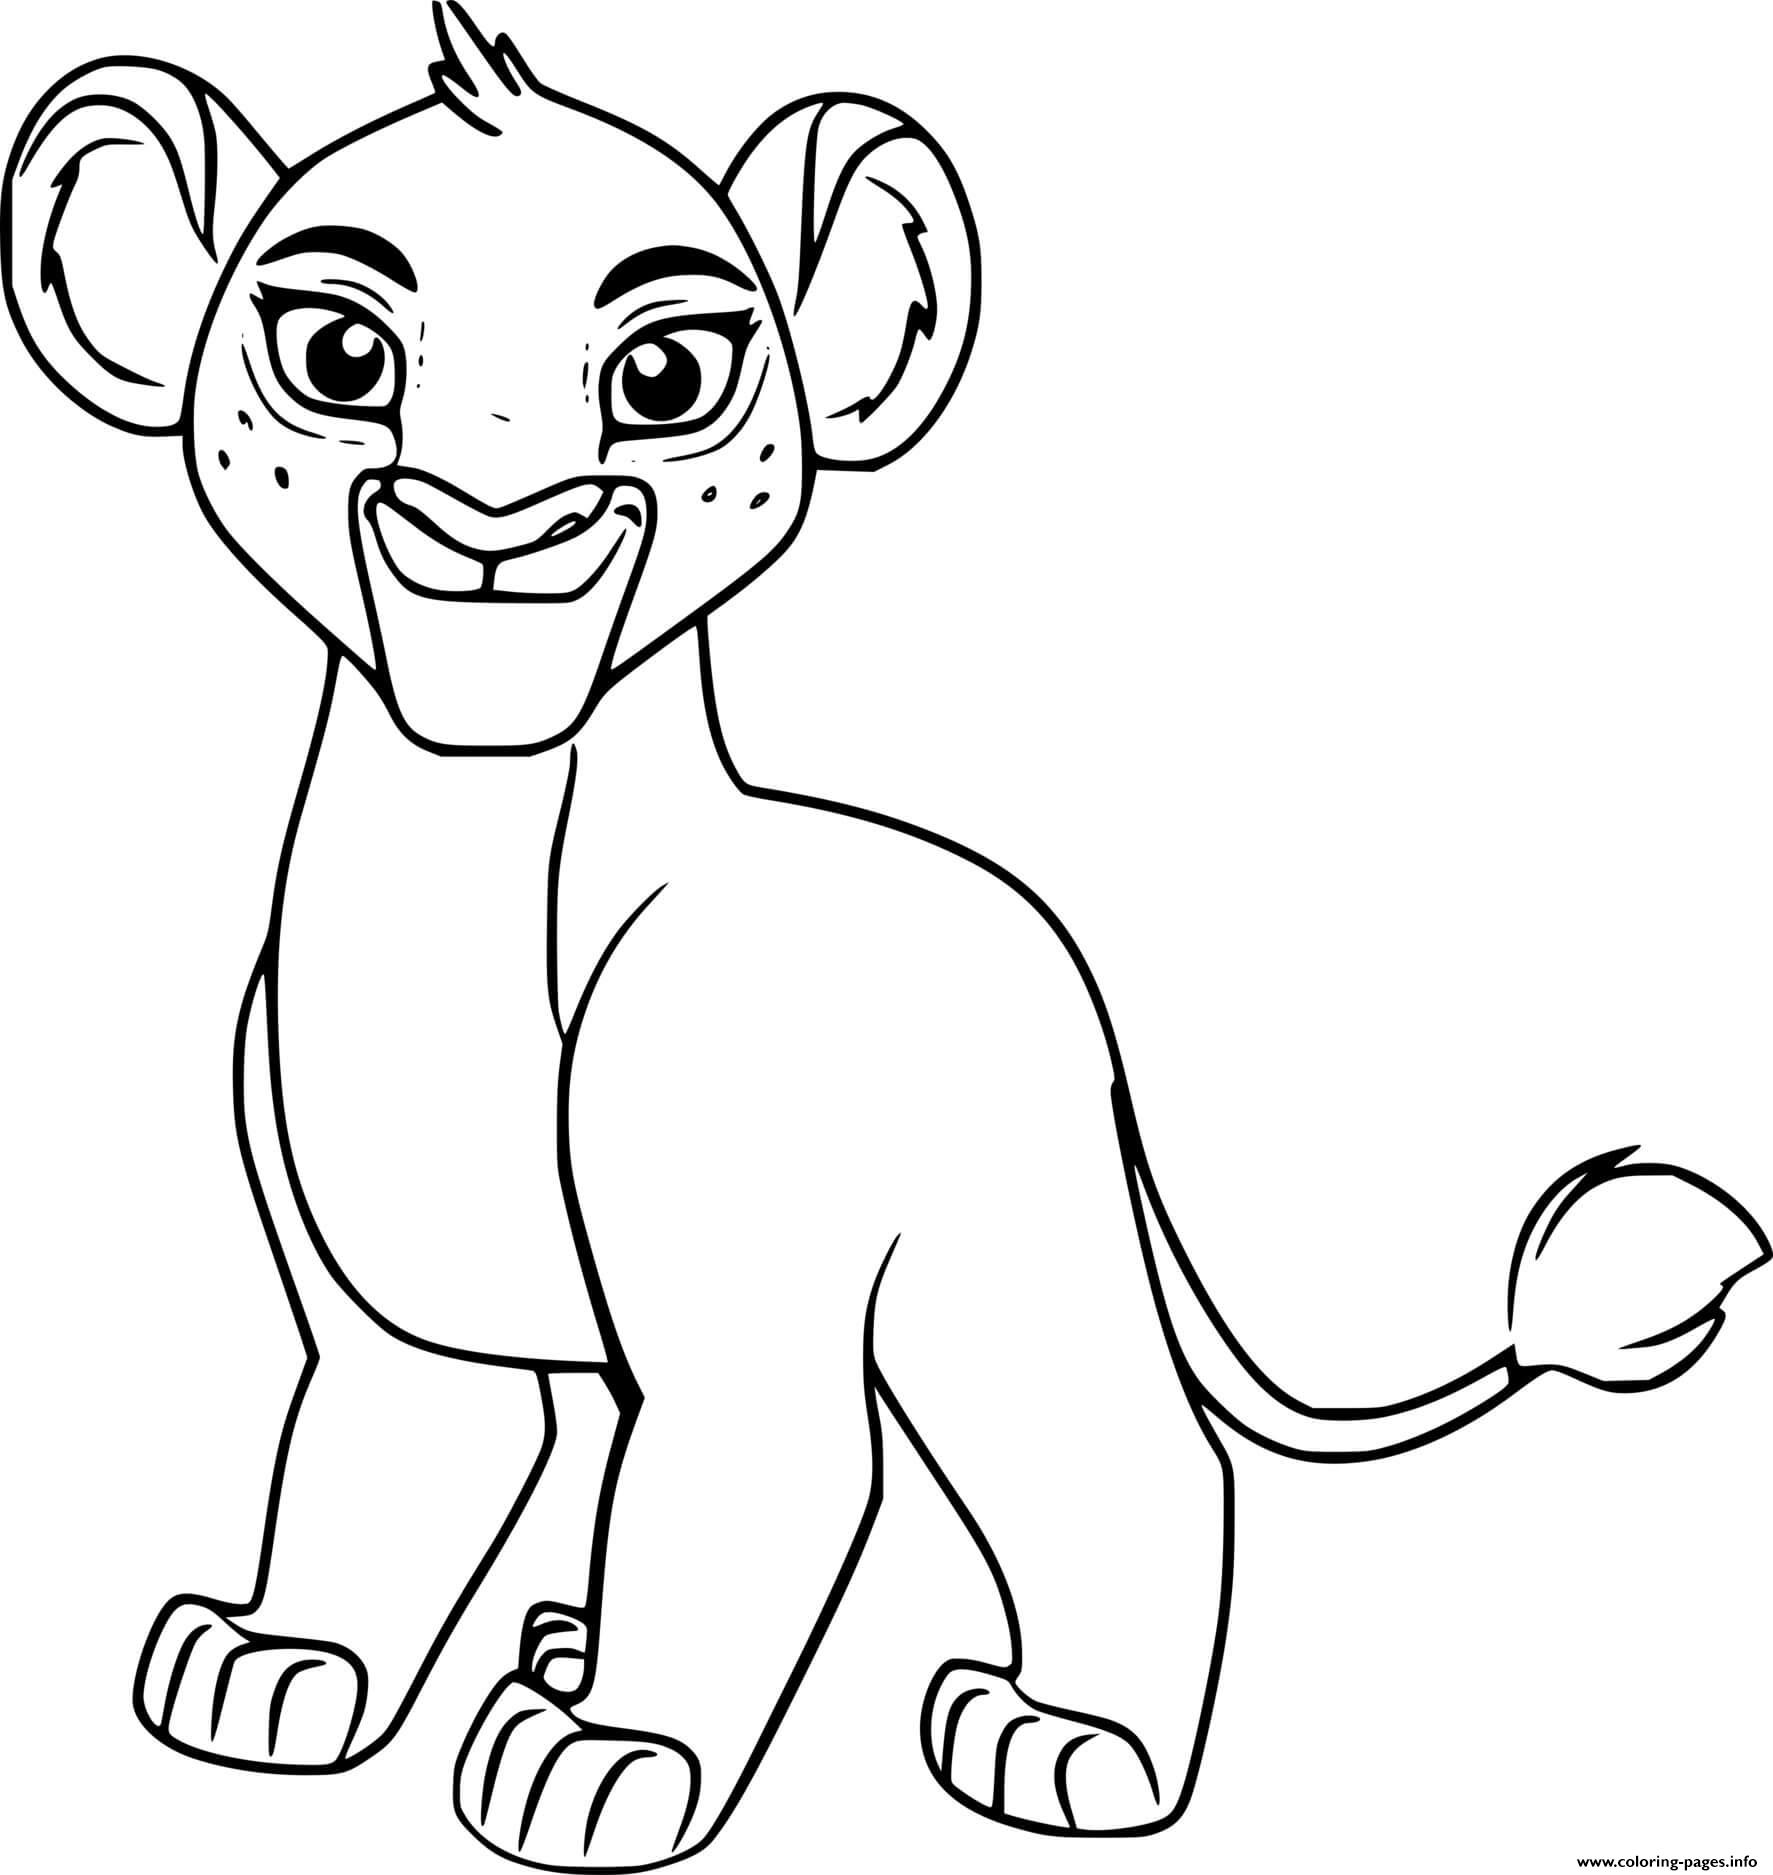 Tiifu Lion coloring pages